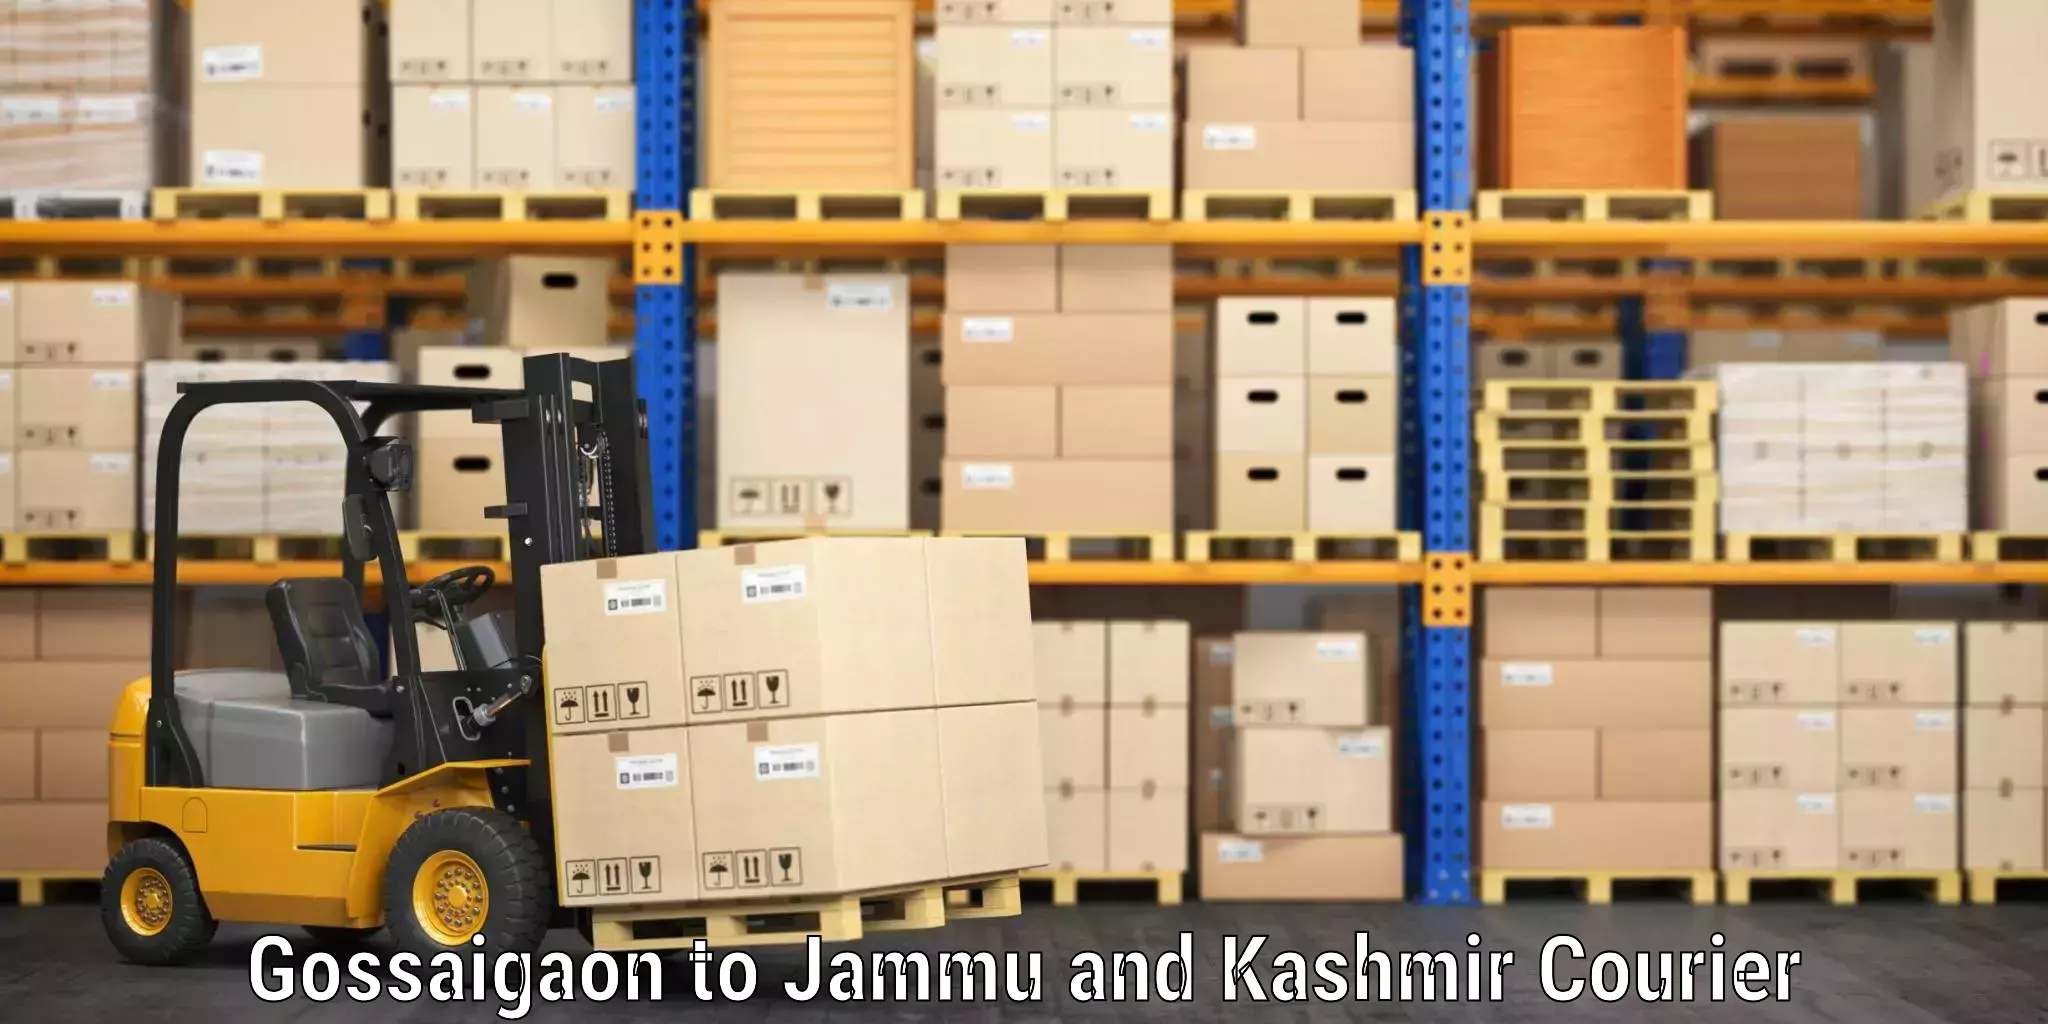 Online luggage shipping booking Gossaigaon to Pulwama